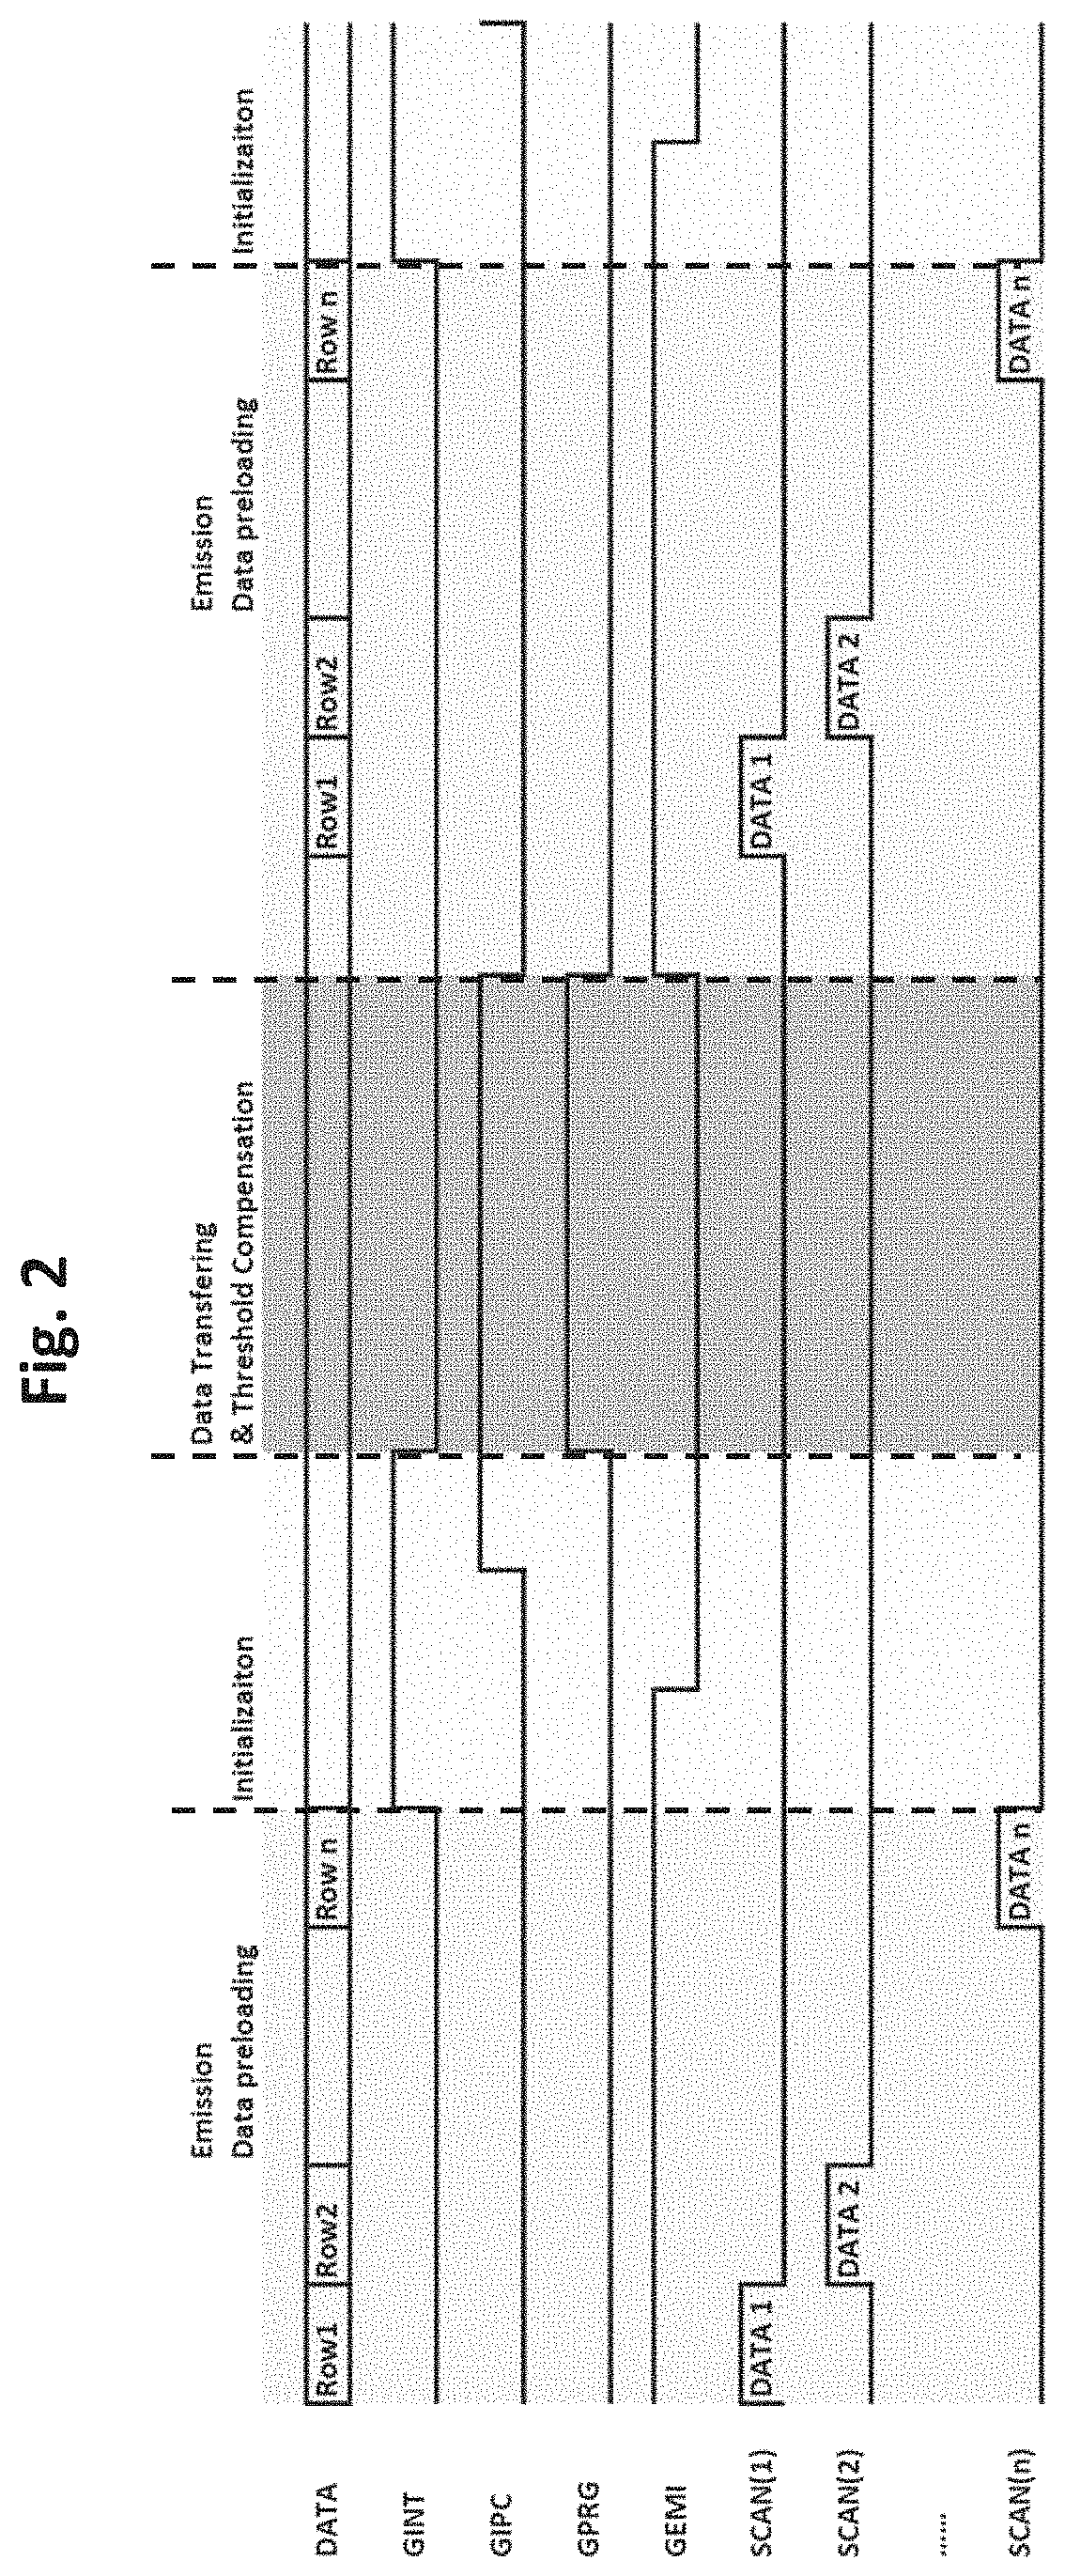 TFT pixel threshold voltage compensation circuit with global compensation